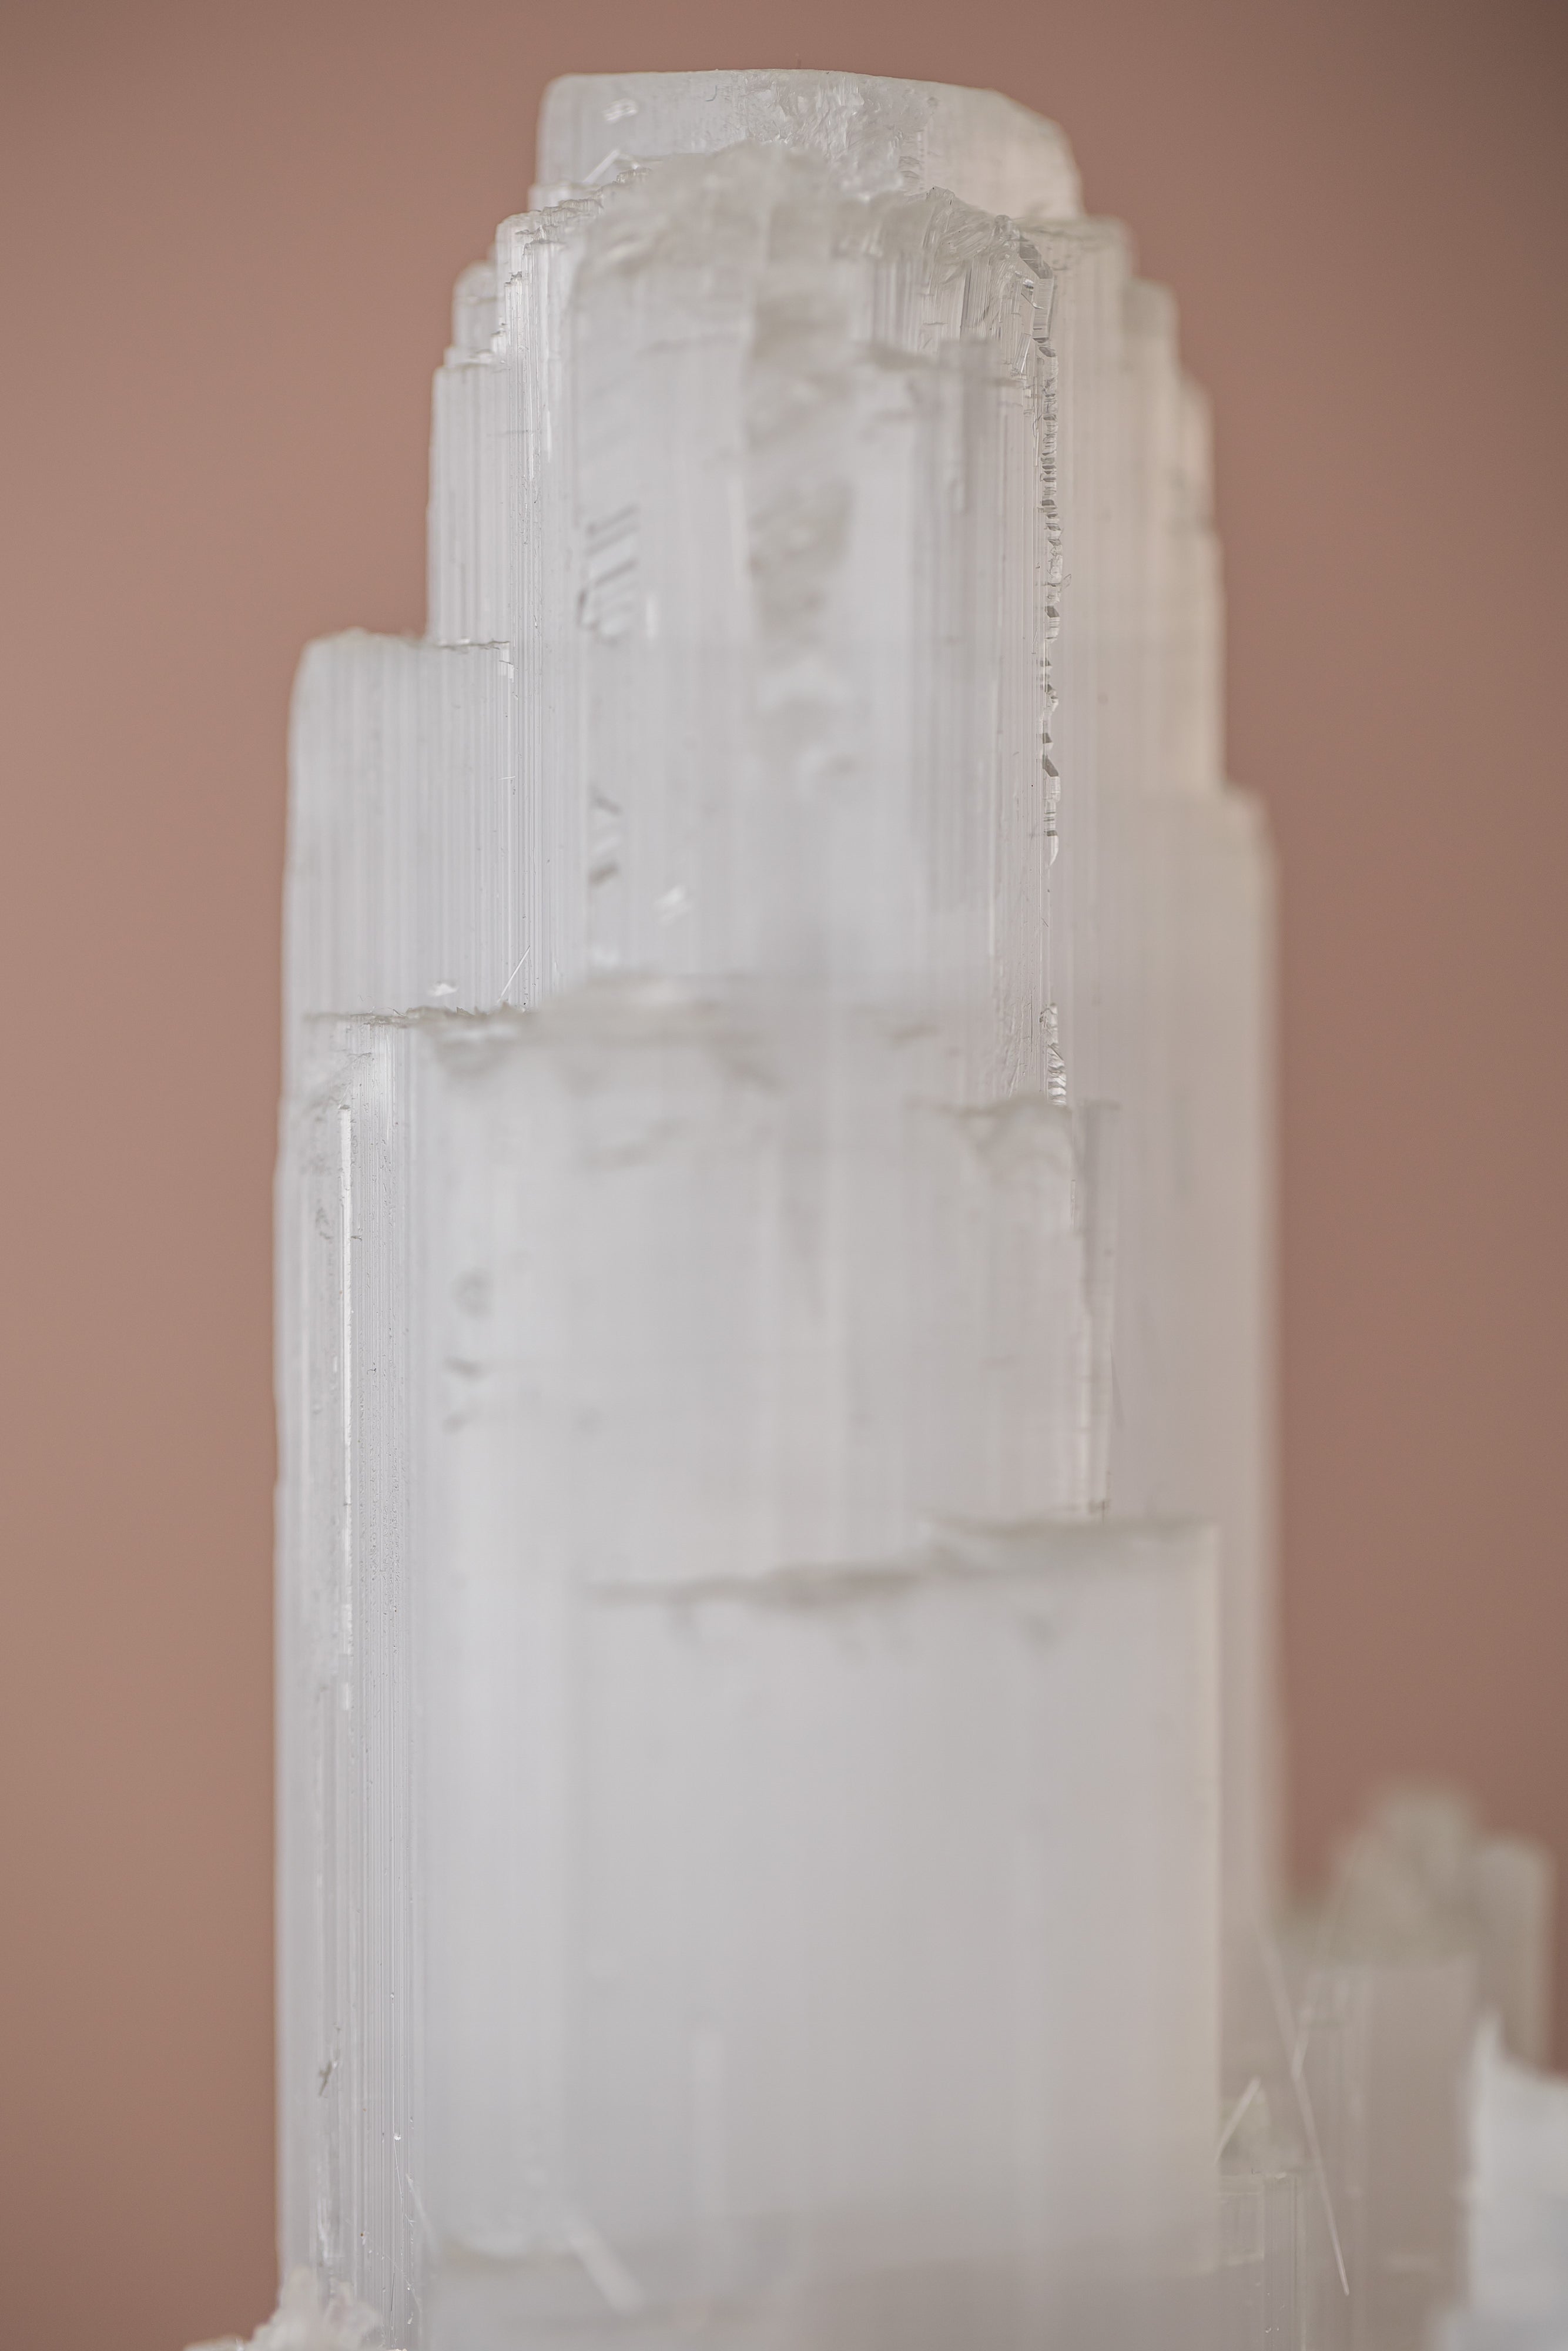 Large Selenite Tower - Majestic Home Décor Crystal for Spiritual Cleansing - Everyday Rocks